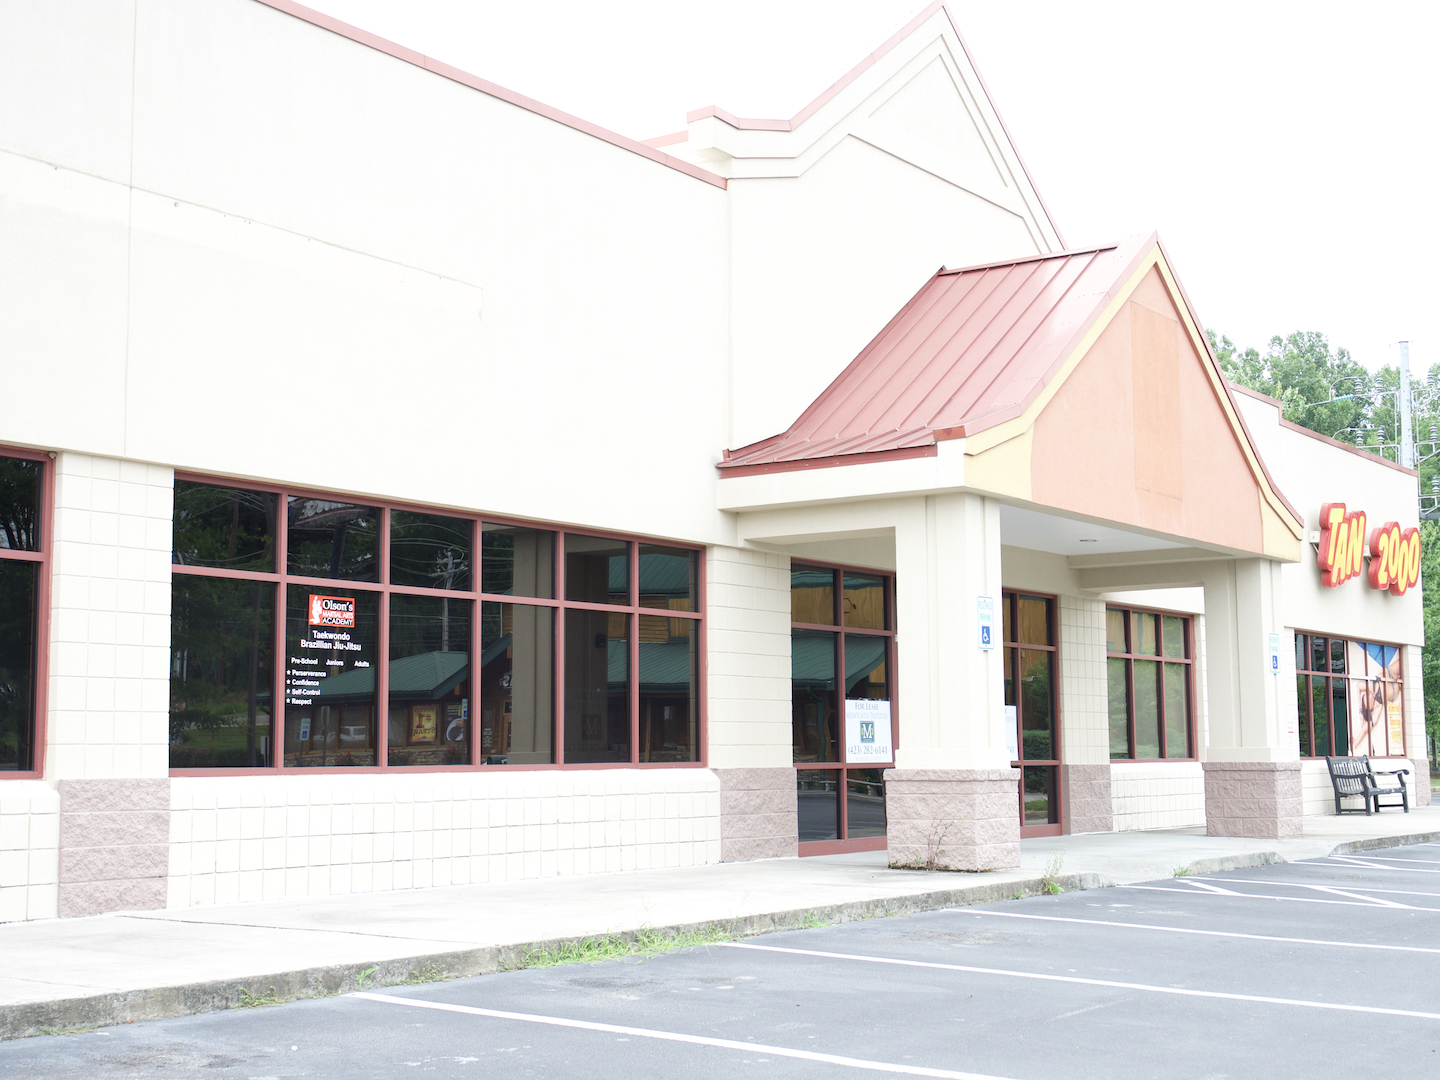 1900 North Roan Street Johnson City,Tennessee 37601,Restaurant/Professional Office Space,North Roan Street,1013